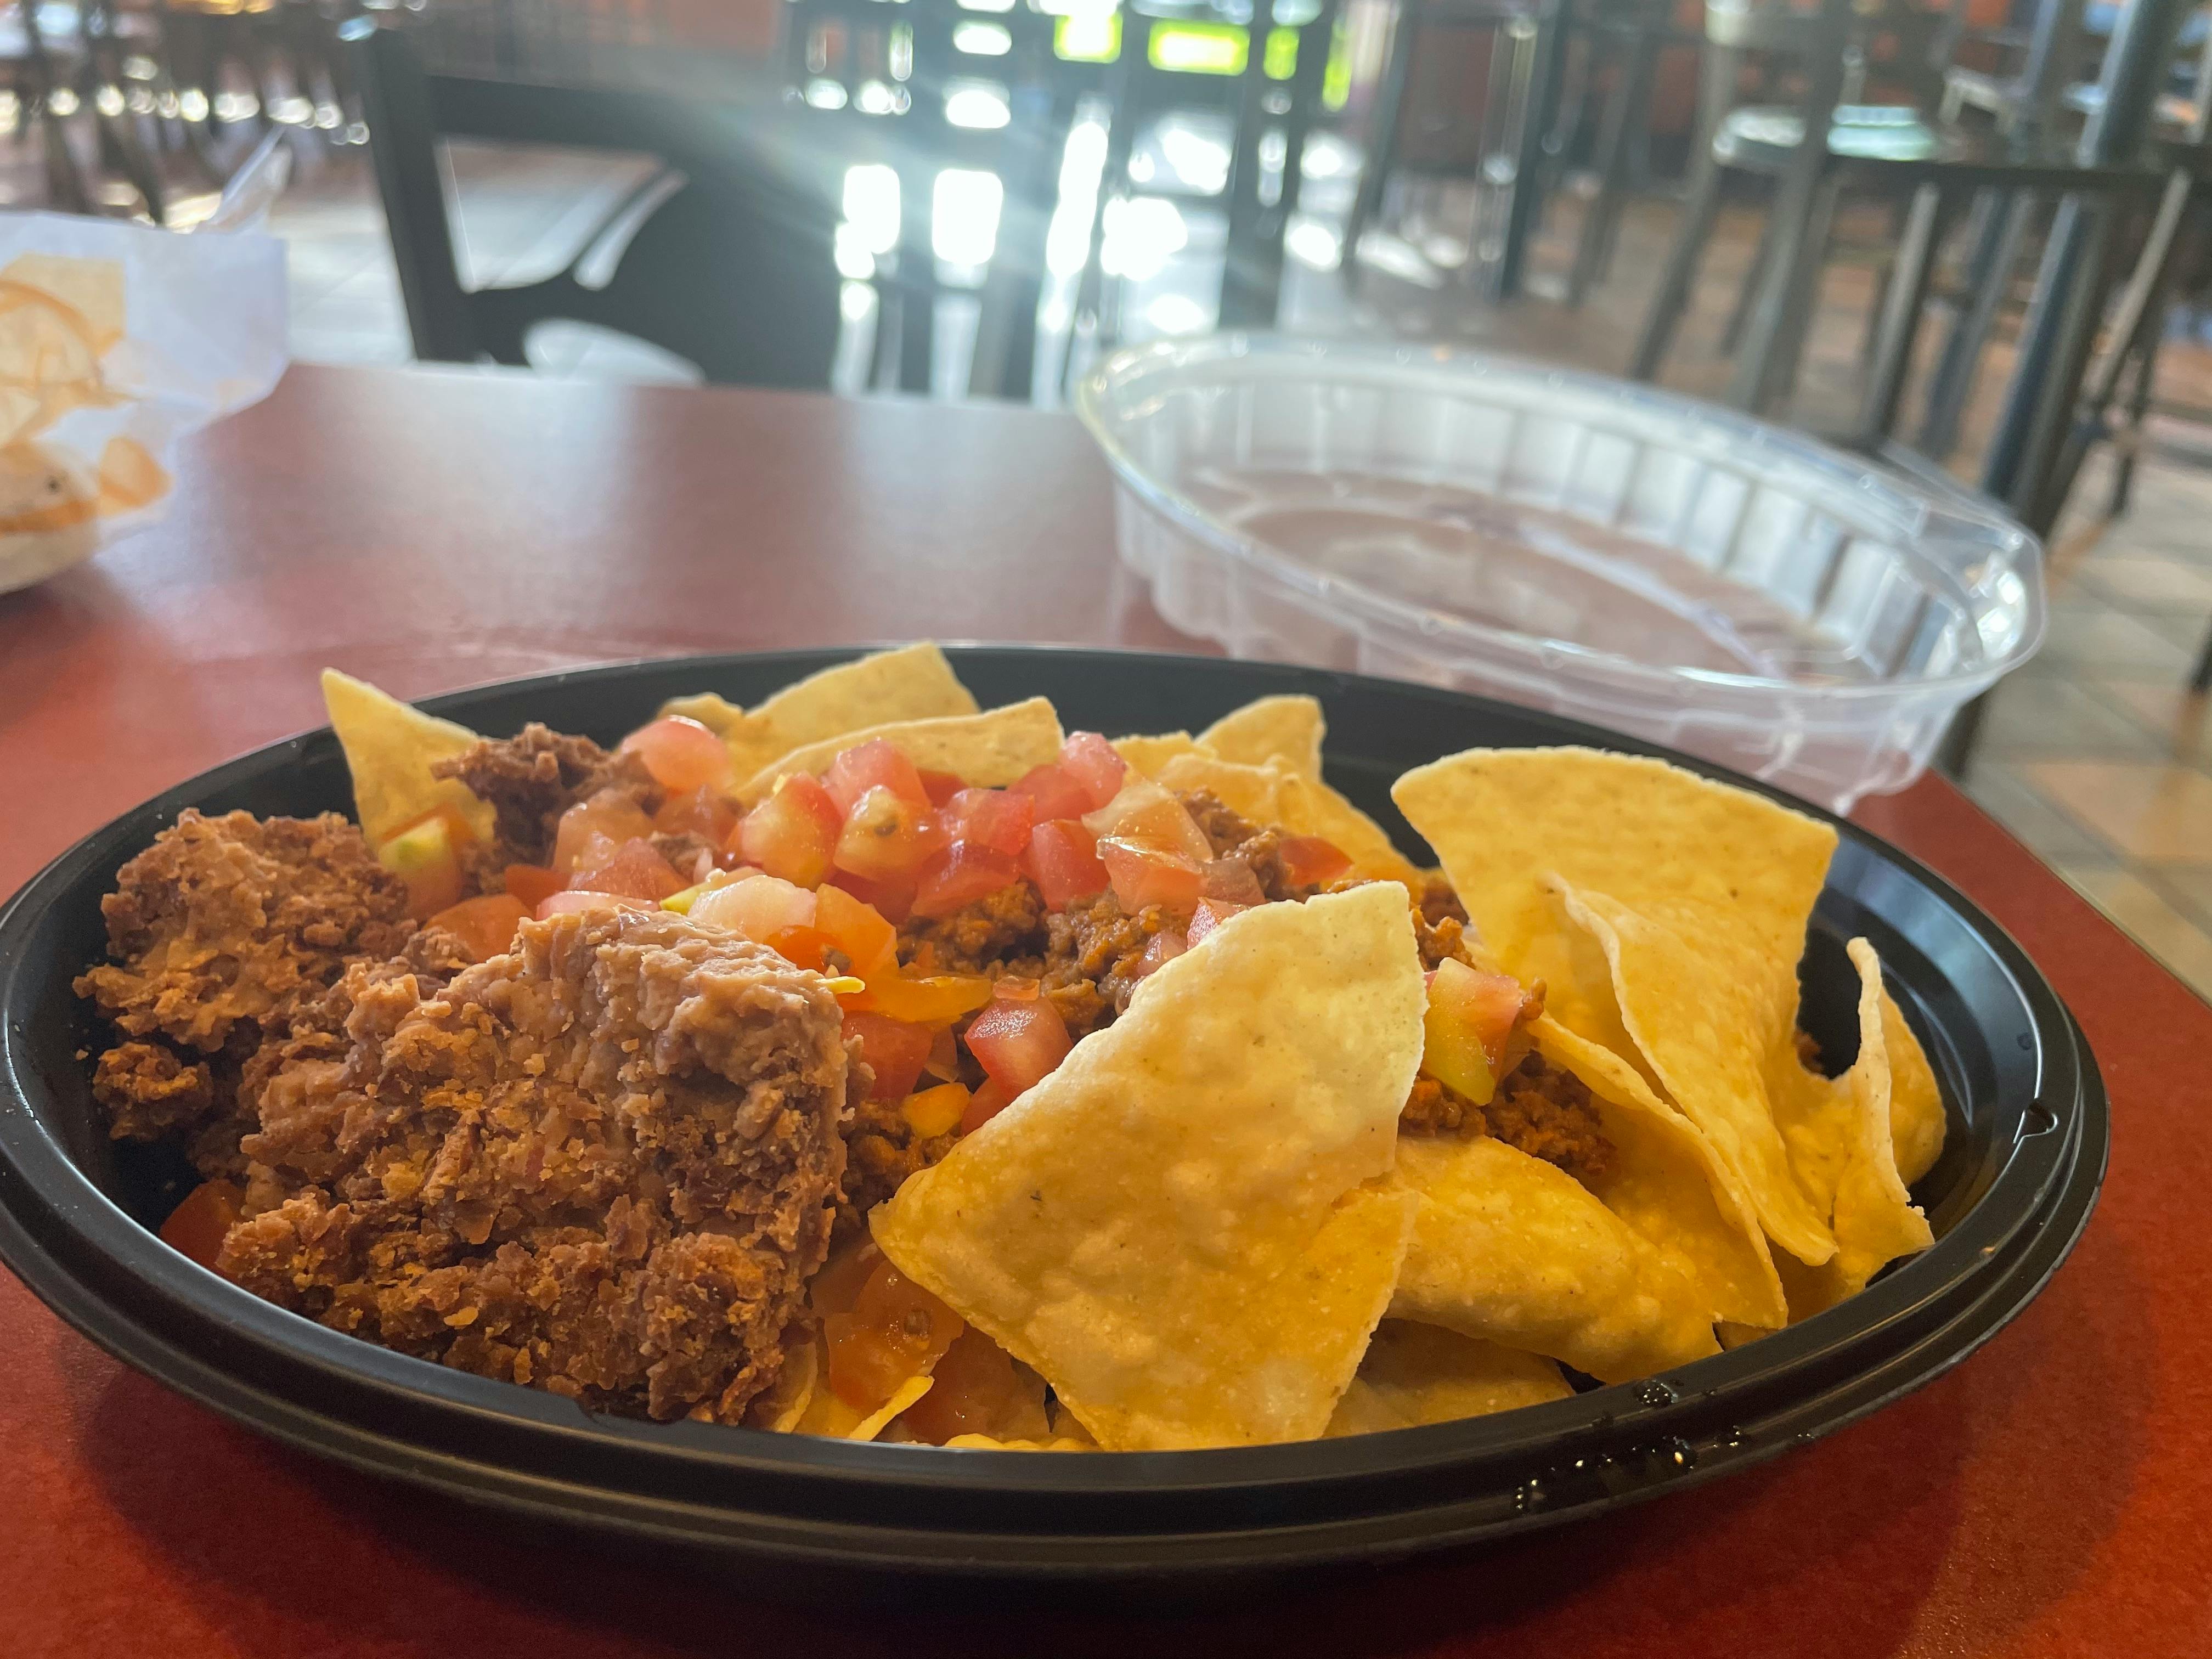 A bowl of "fresco style" vegan nachos from Taco Bell sitting on a table.